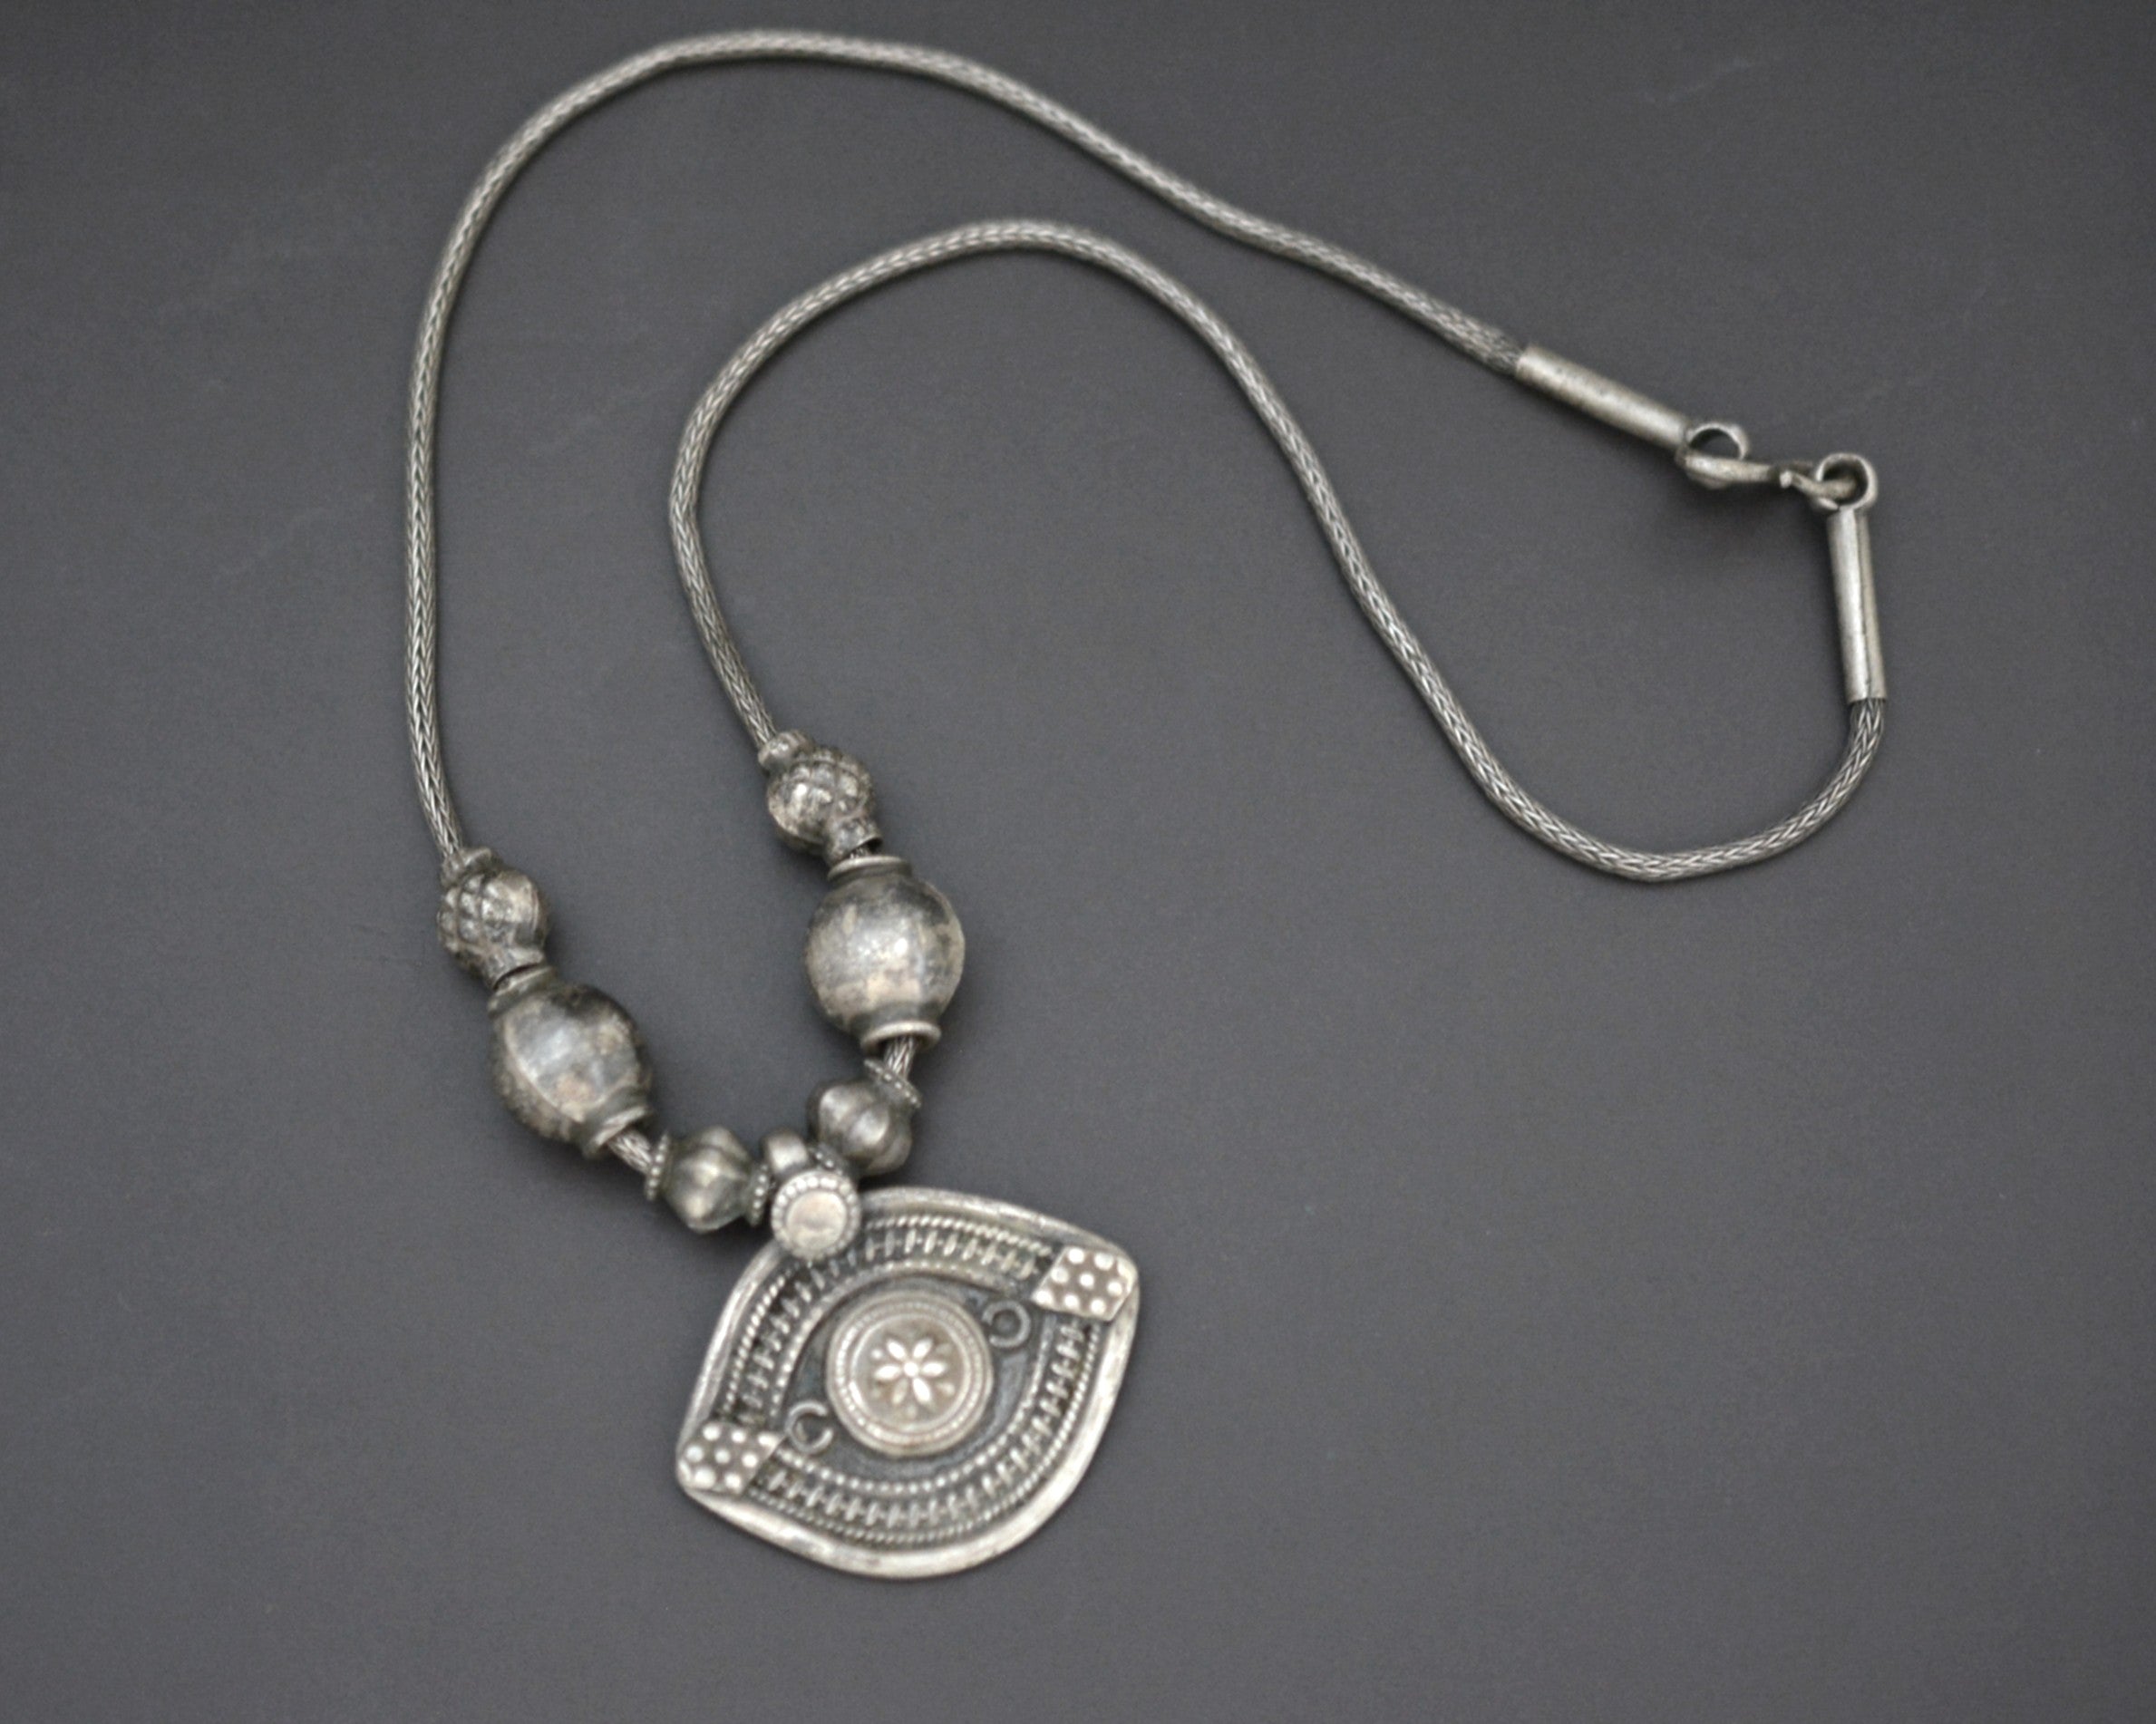 Reserved for A. - Indian Amulet Silver Beads Necklace with Snake Chain